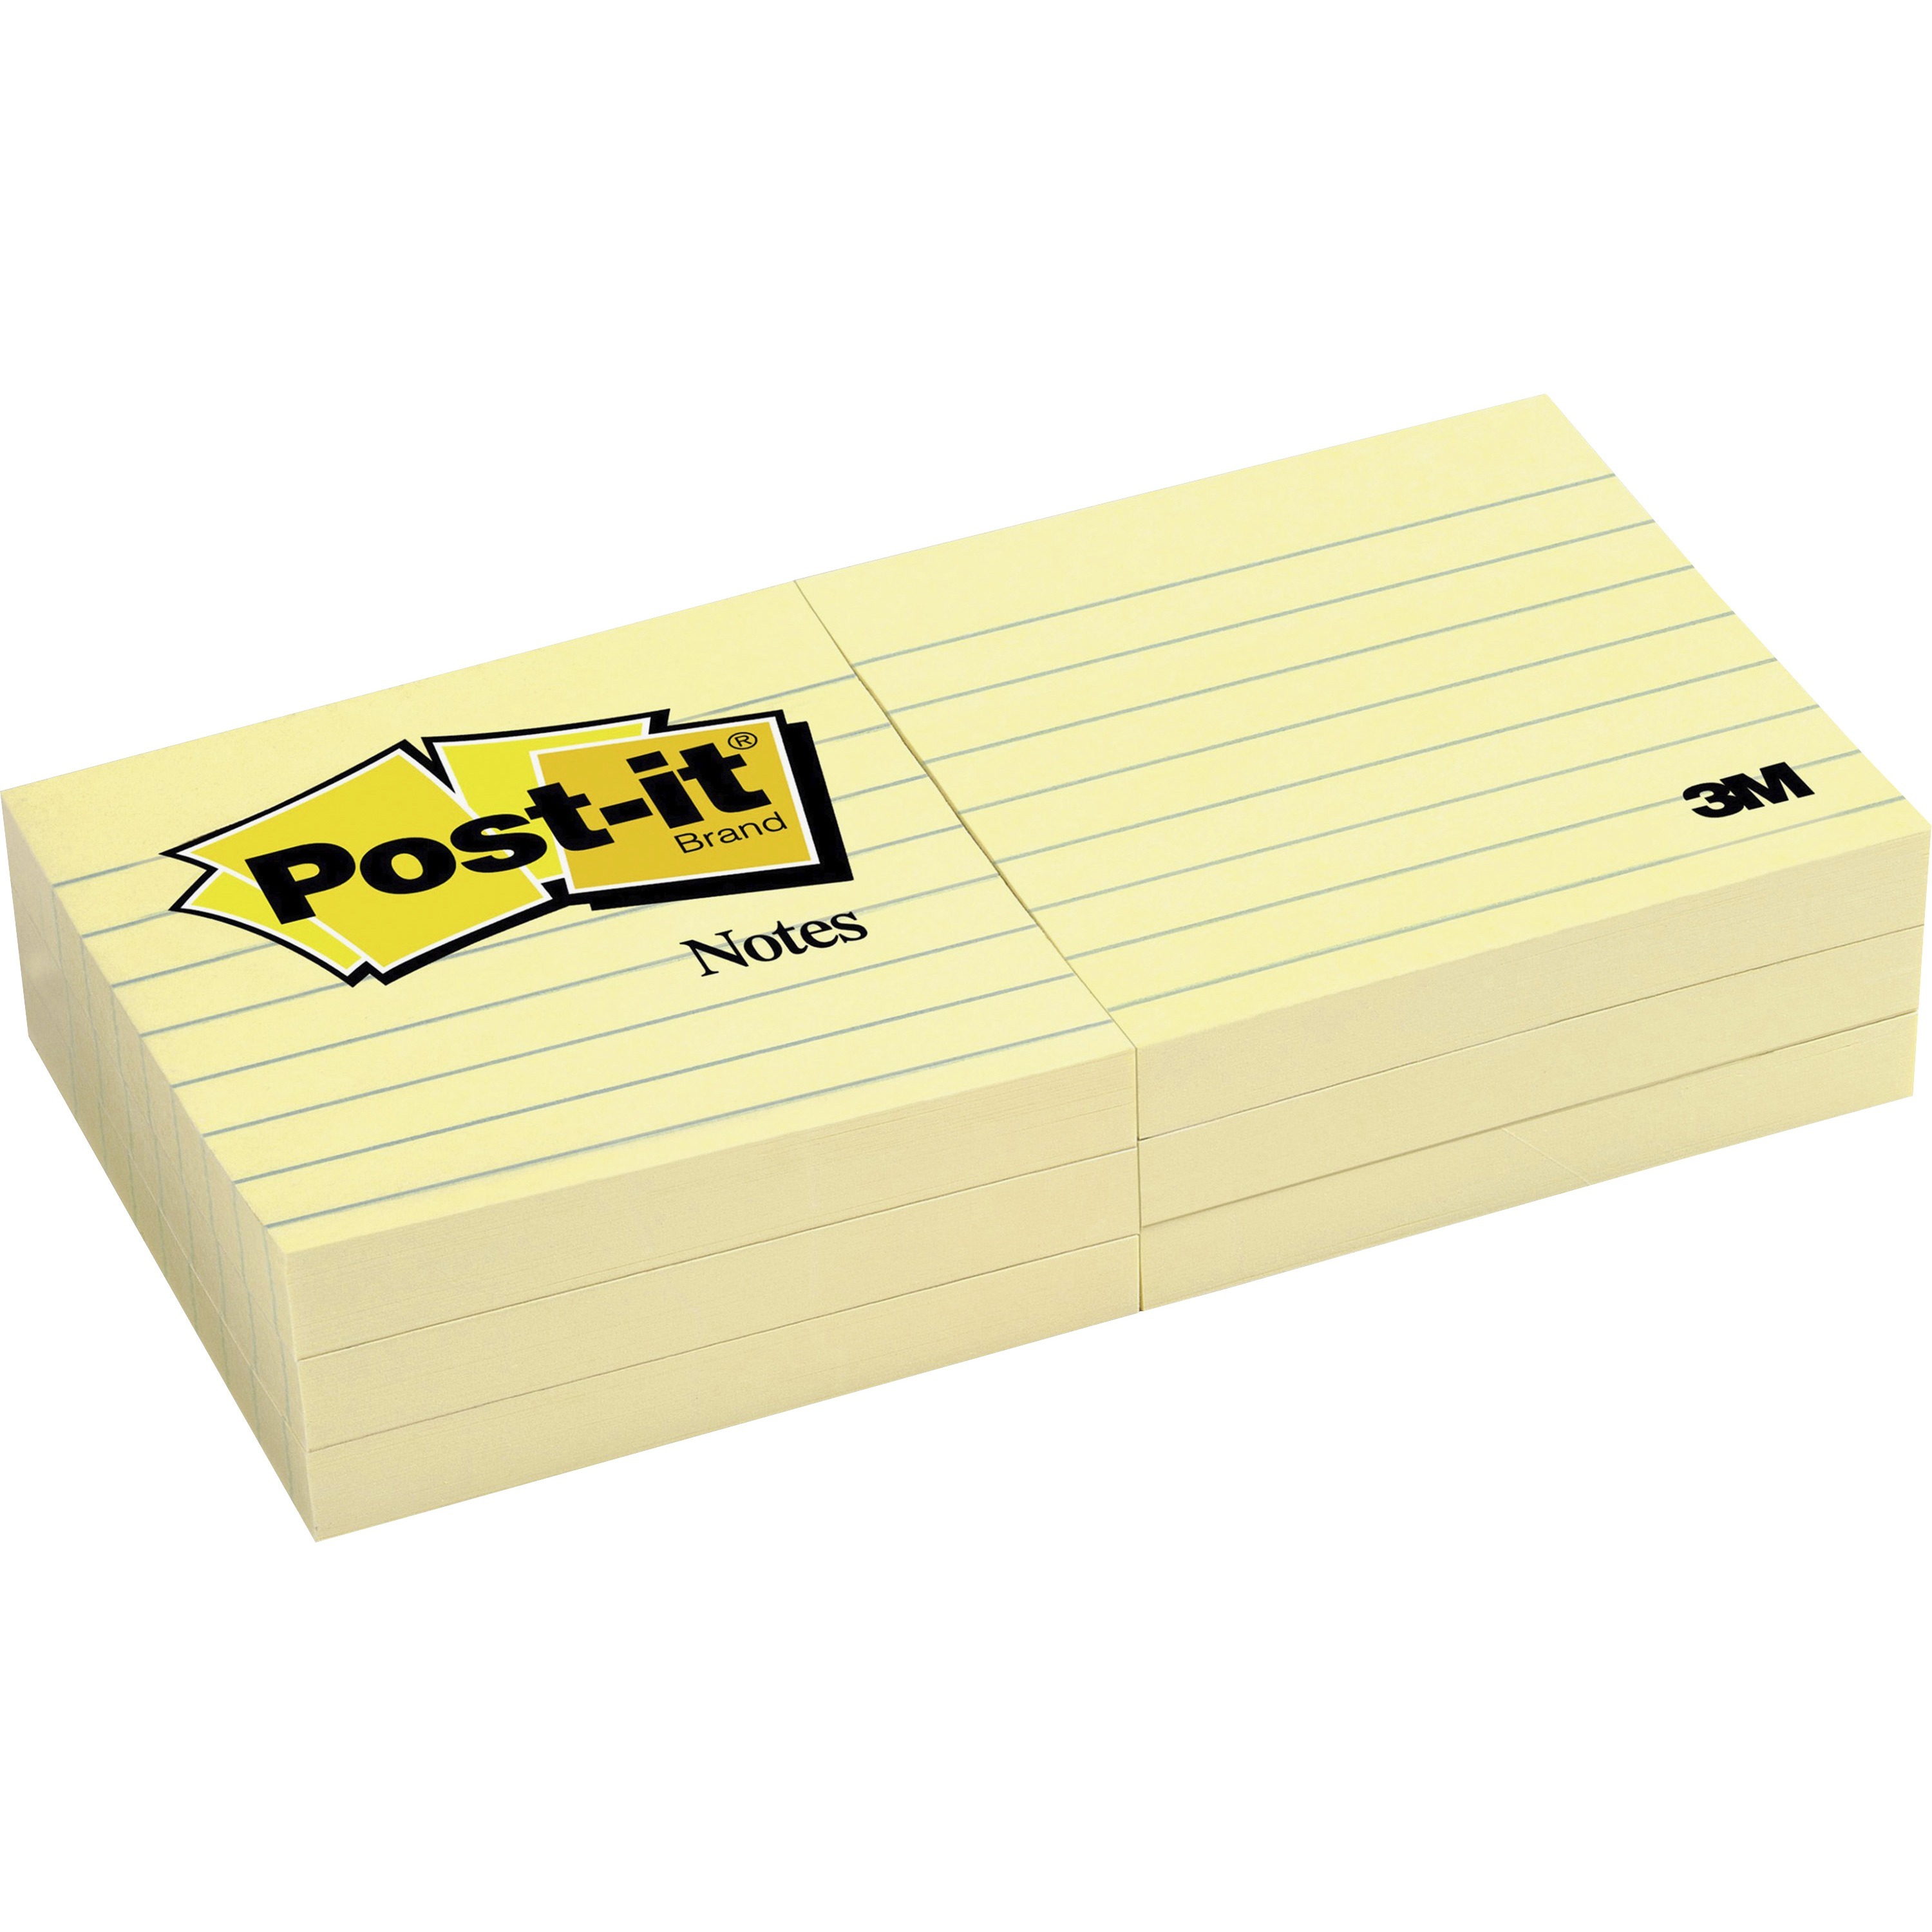 Post-it Notes, 3 in x 3 in, Canary Yellow, Lined